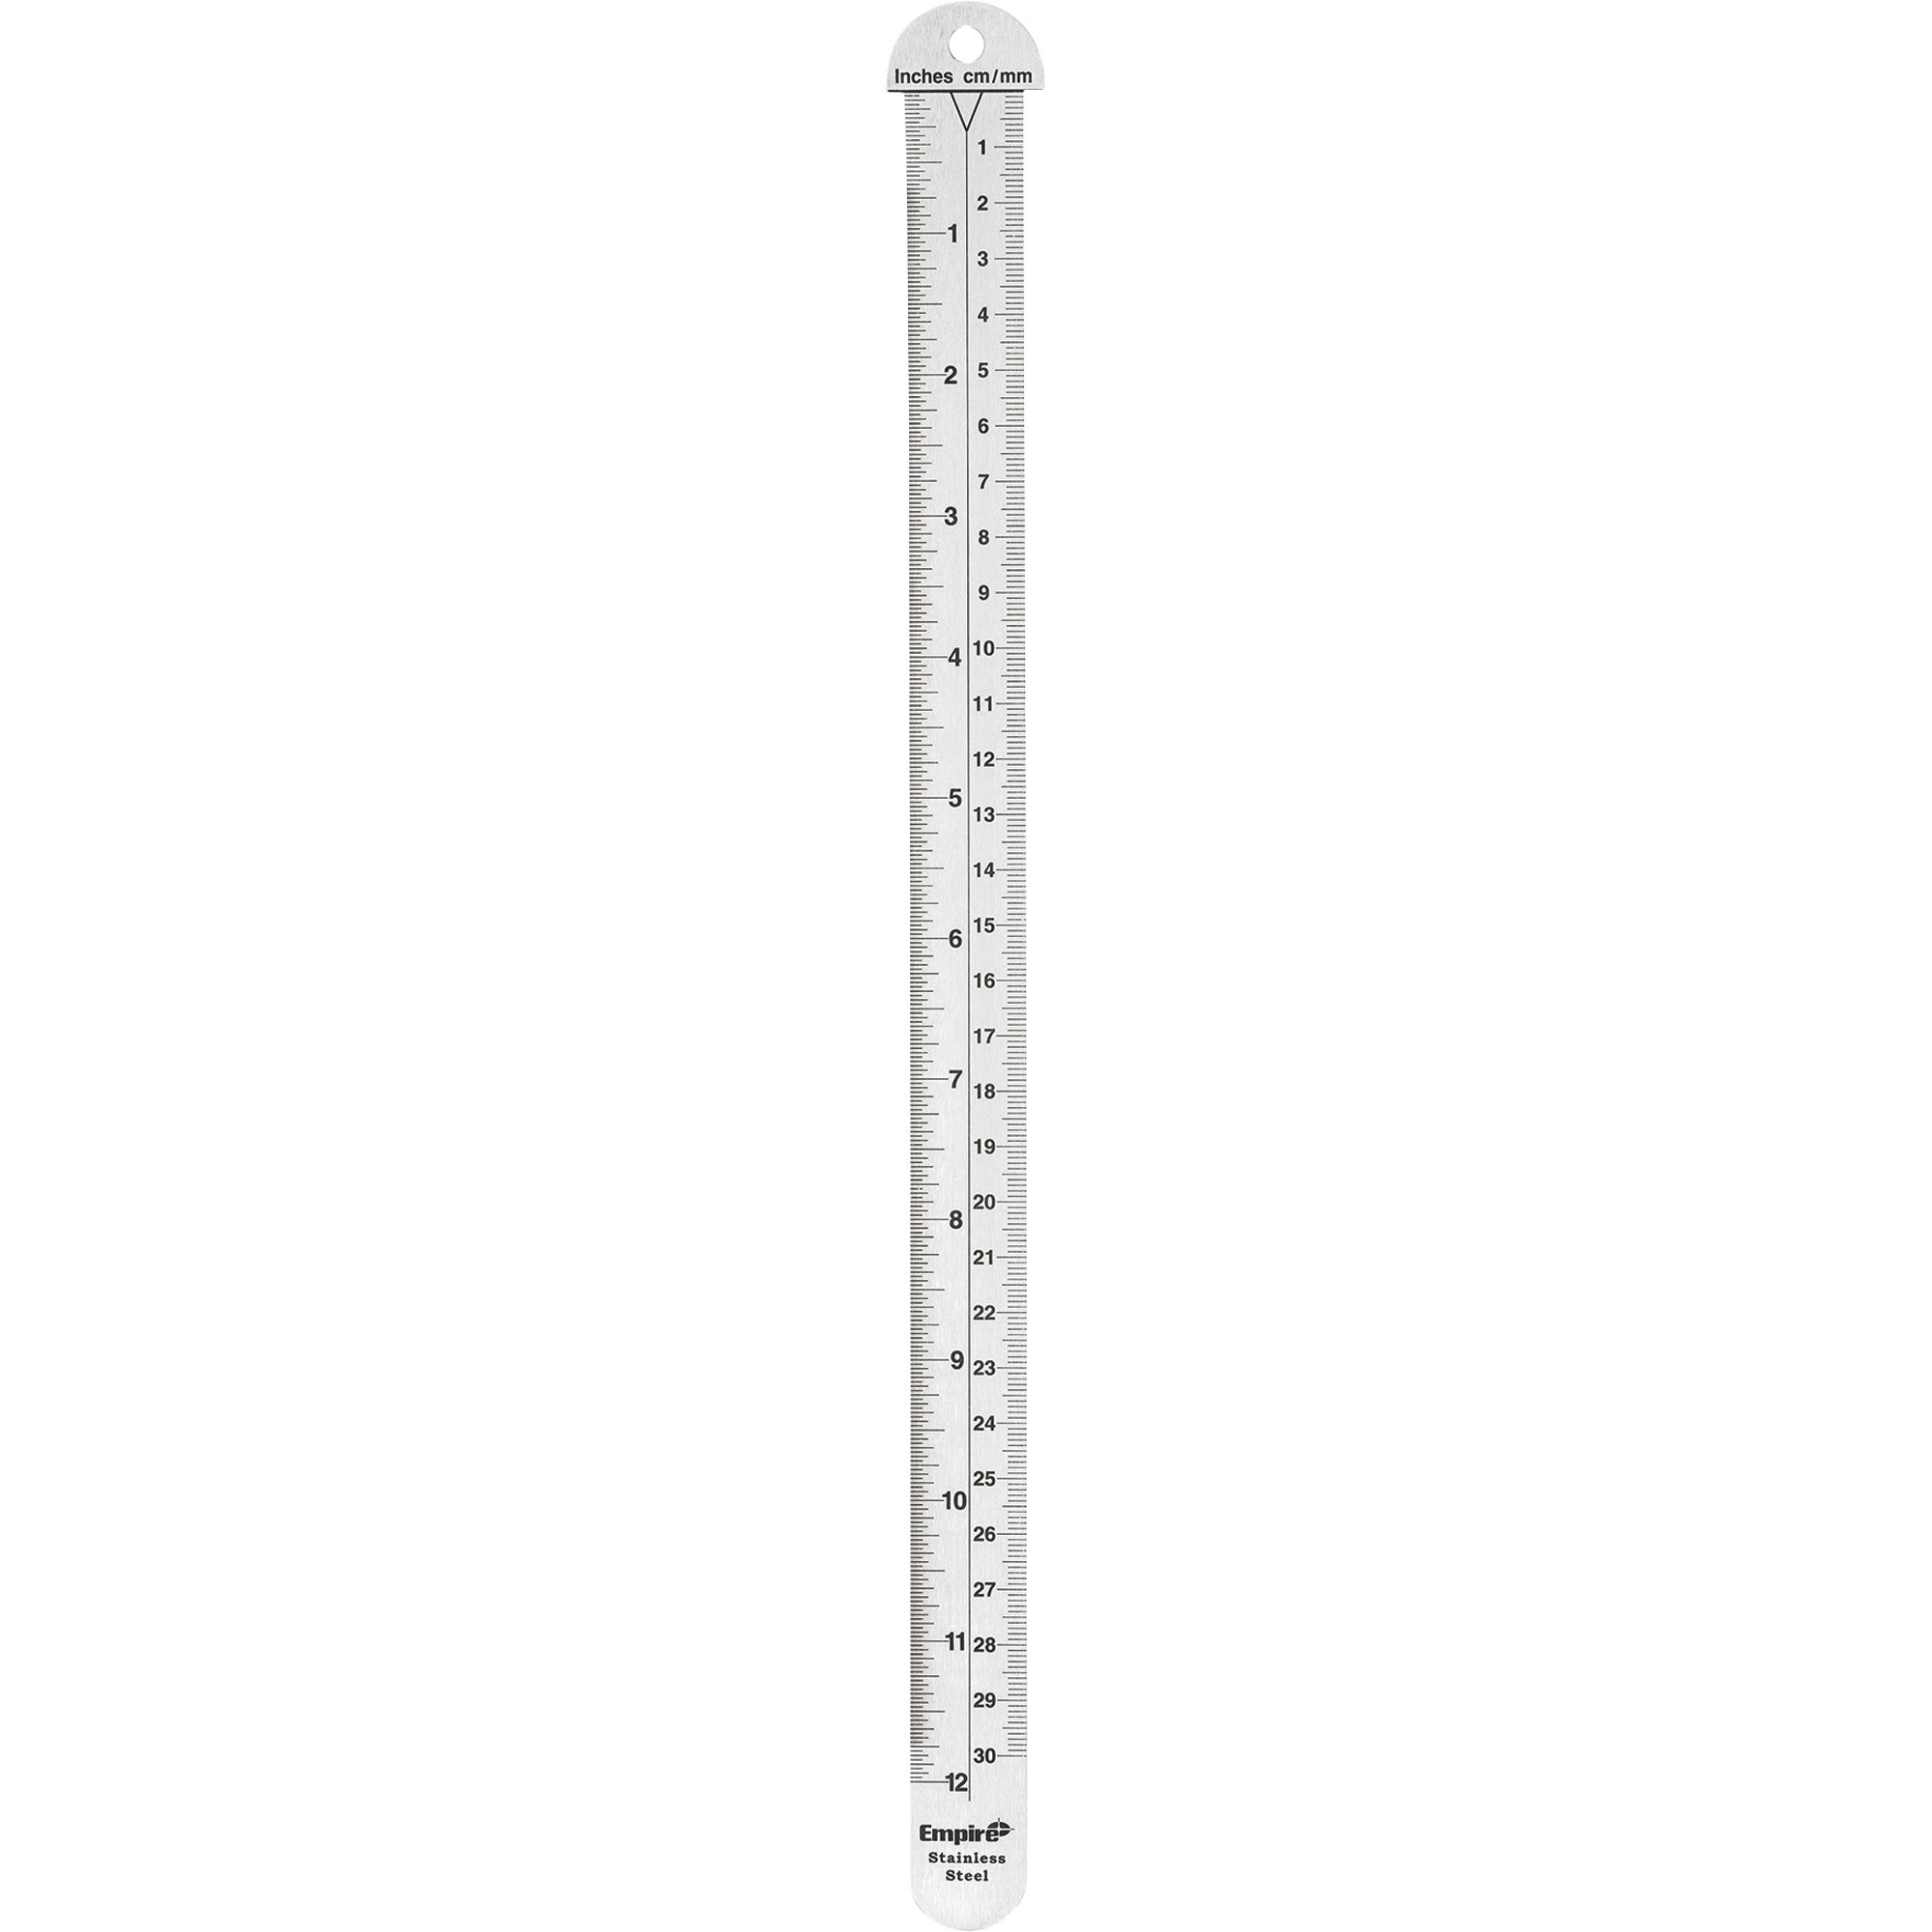 Empire 6 Metal Ruler with millimeter and 1/16 markings